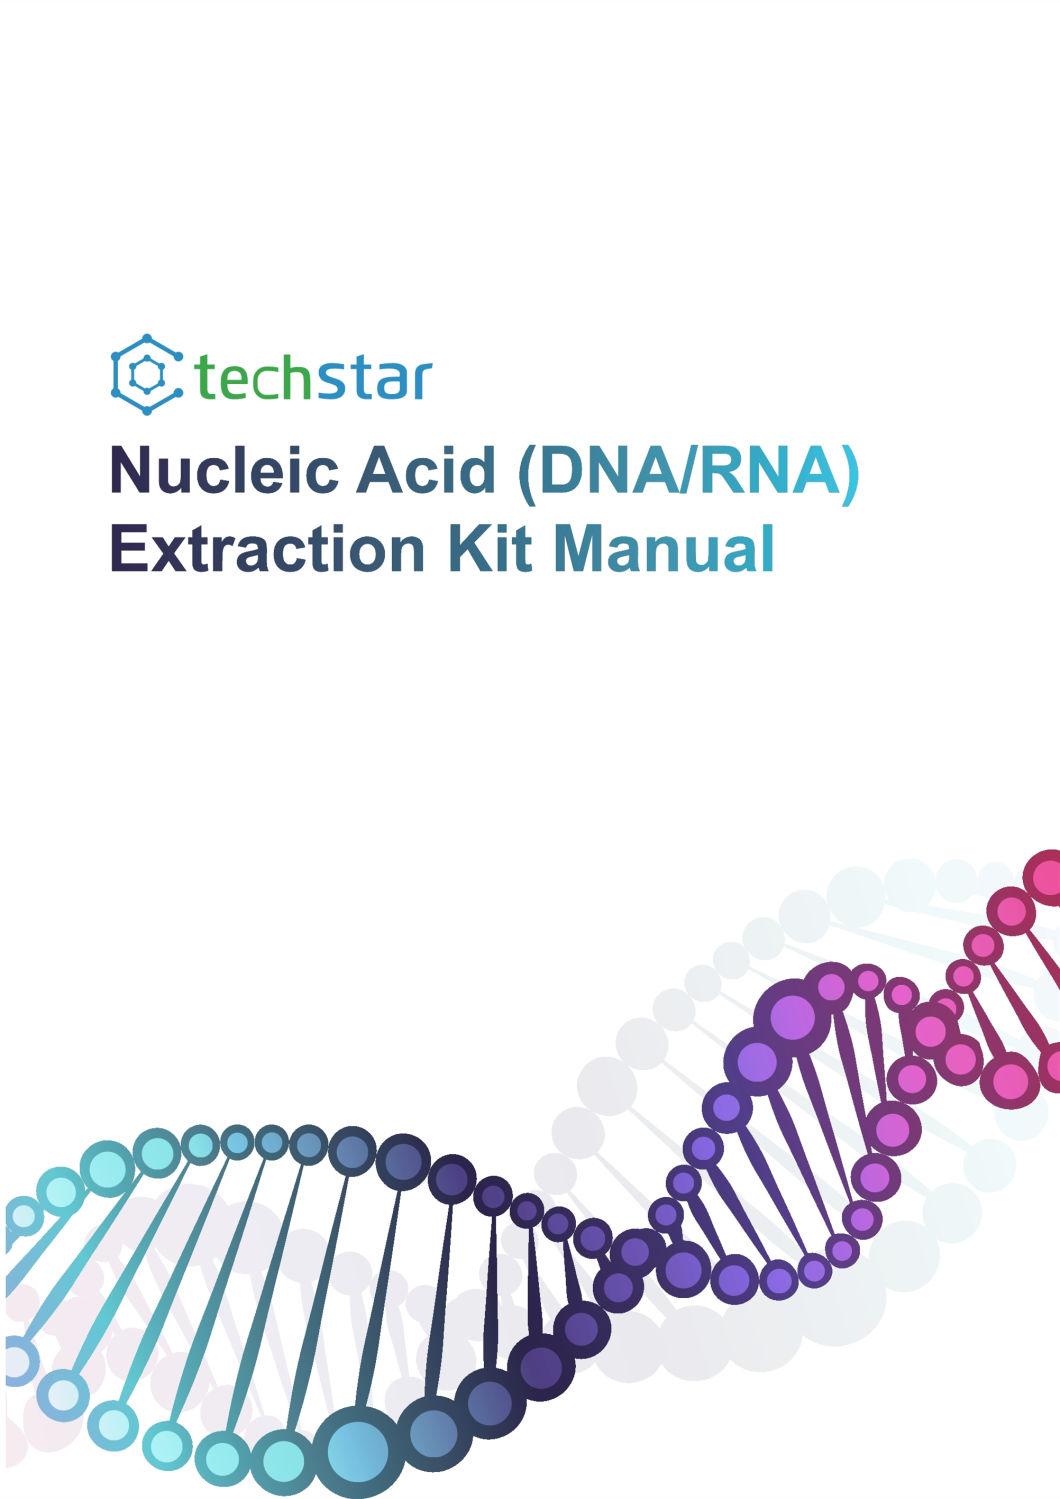 Techstar Rapid Kits Test Rna Extraction Kits, Nucleic Acid Extraction Kit Rna &DNA Purification Rapid Test Kits